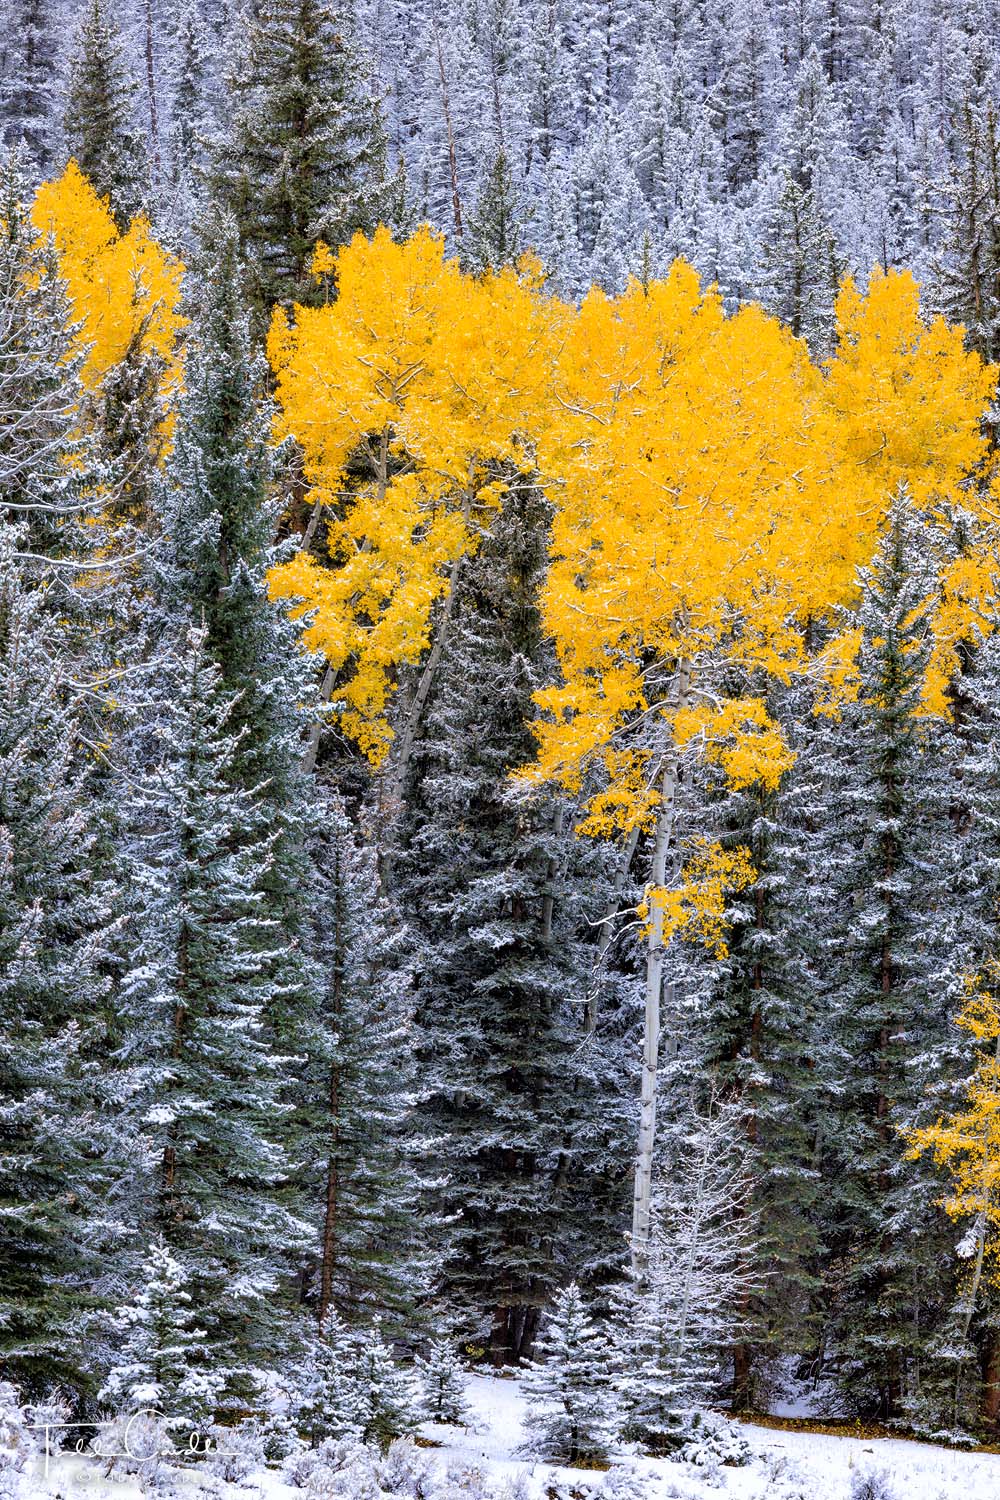 Gold aspens interspersed with snowy conifer forests along the Taylor River in the Sawatch Range.